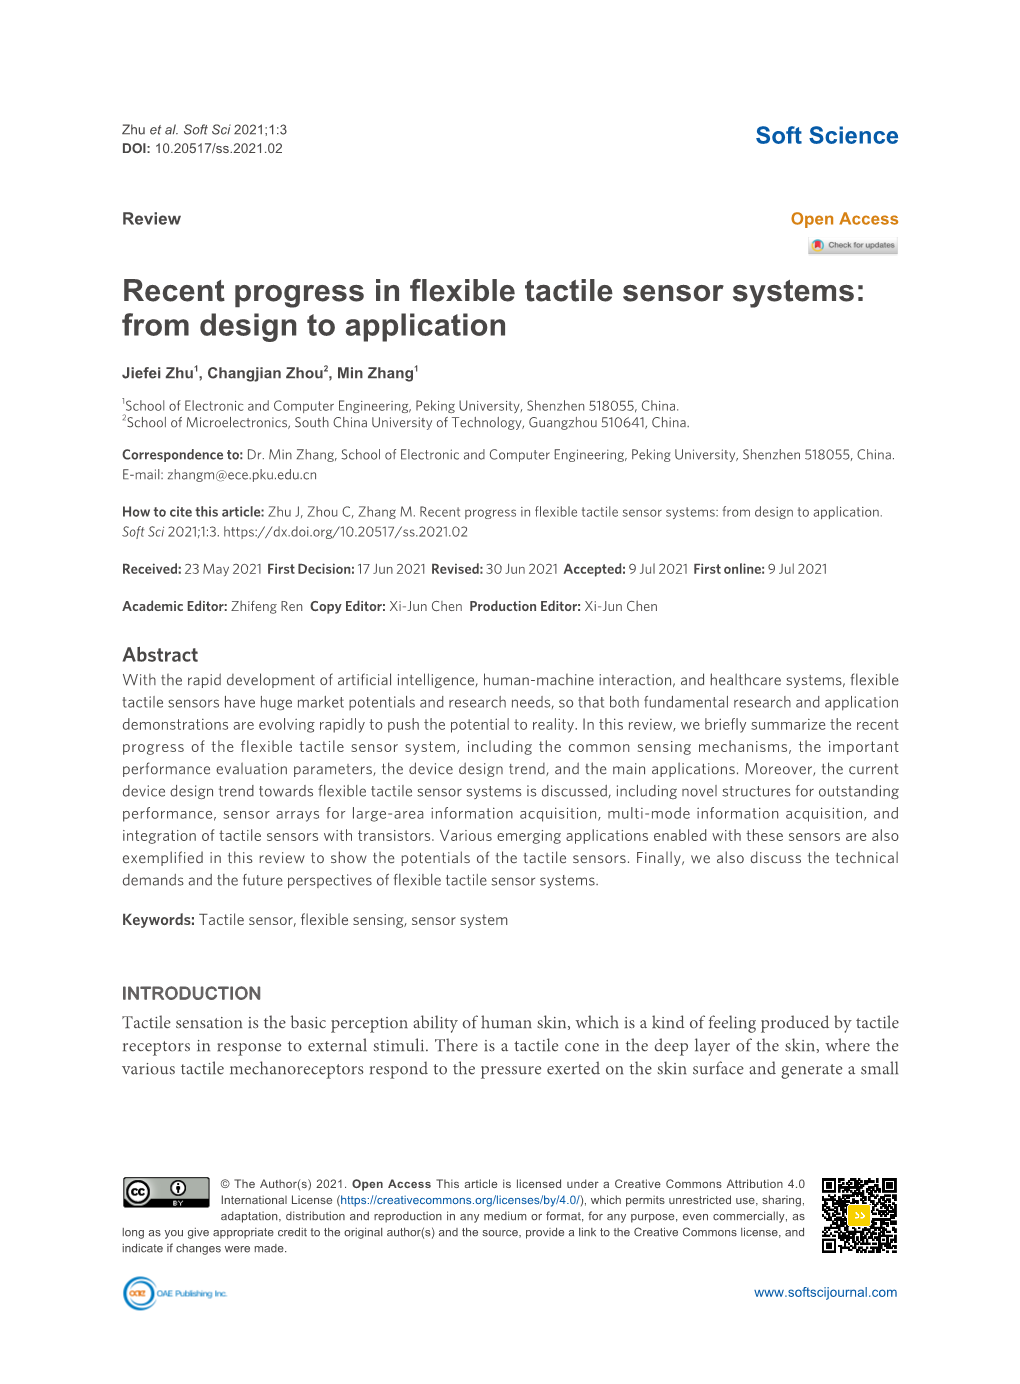 Recent Progress in Flexible Tactile Sensor Systems: from Design to Application